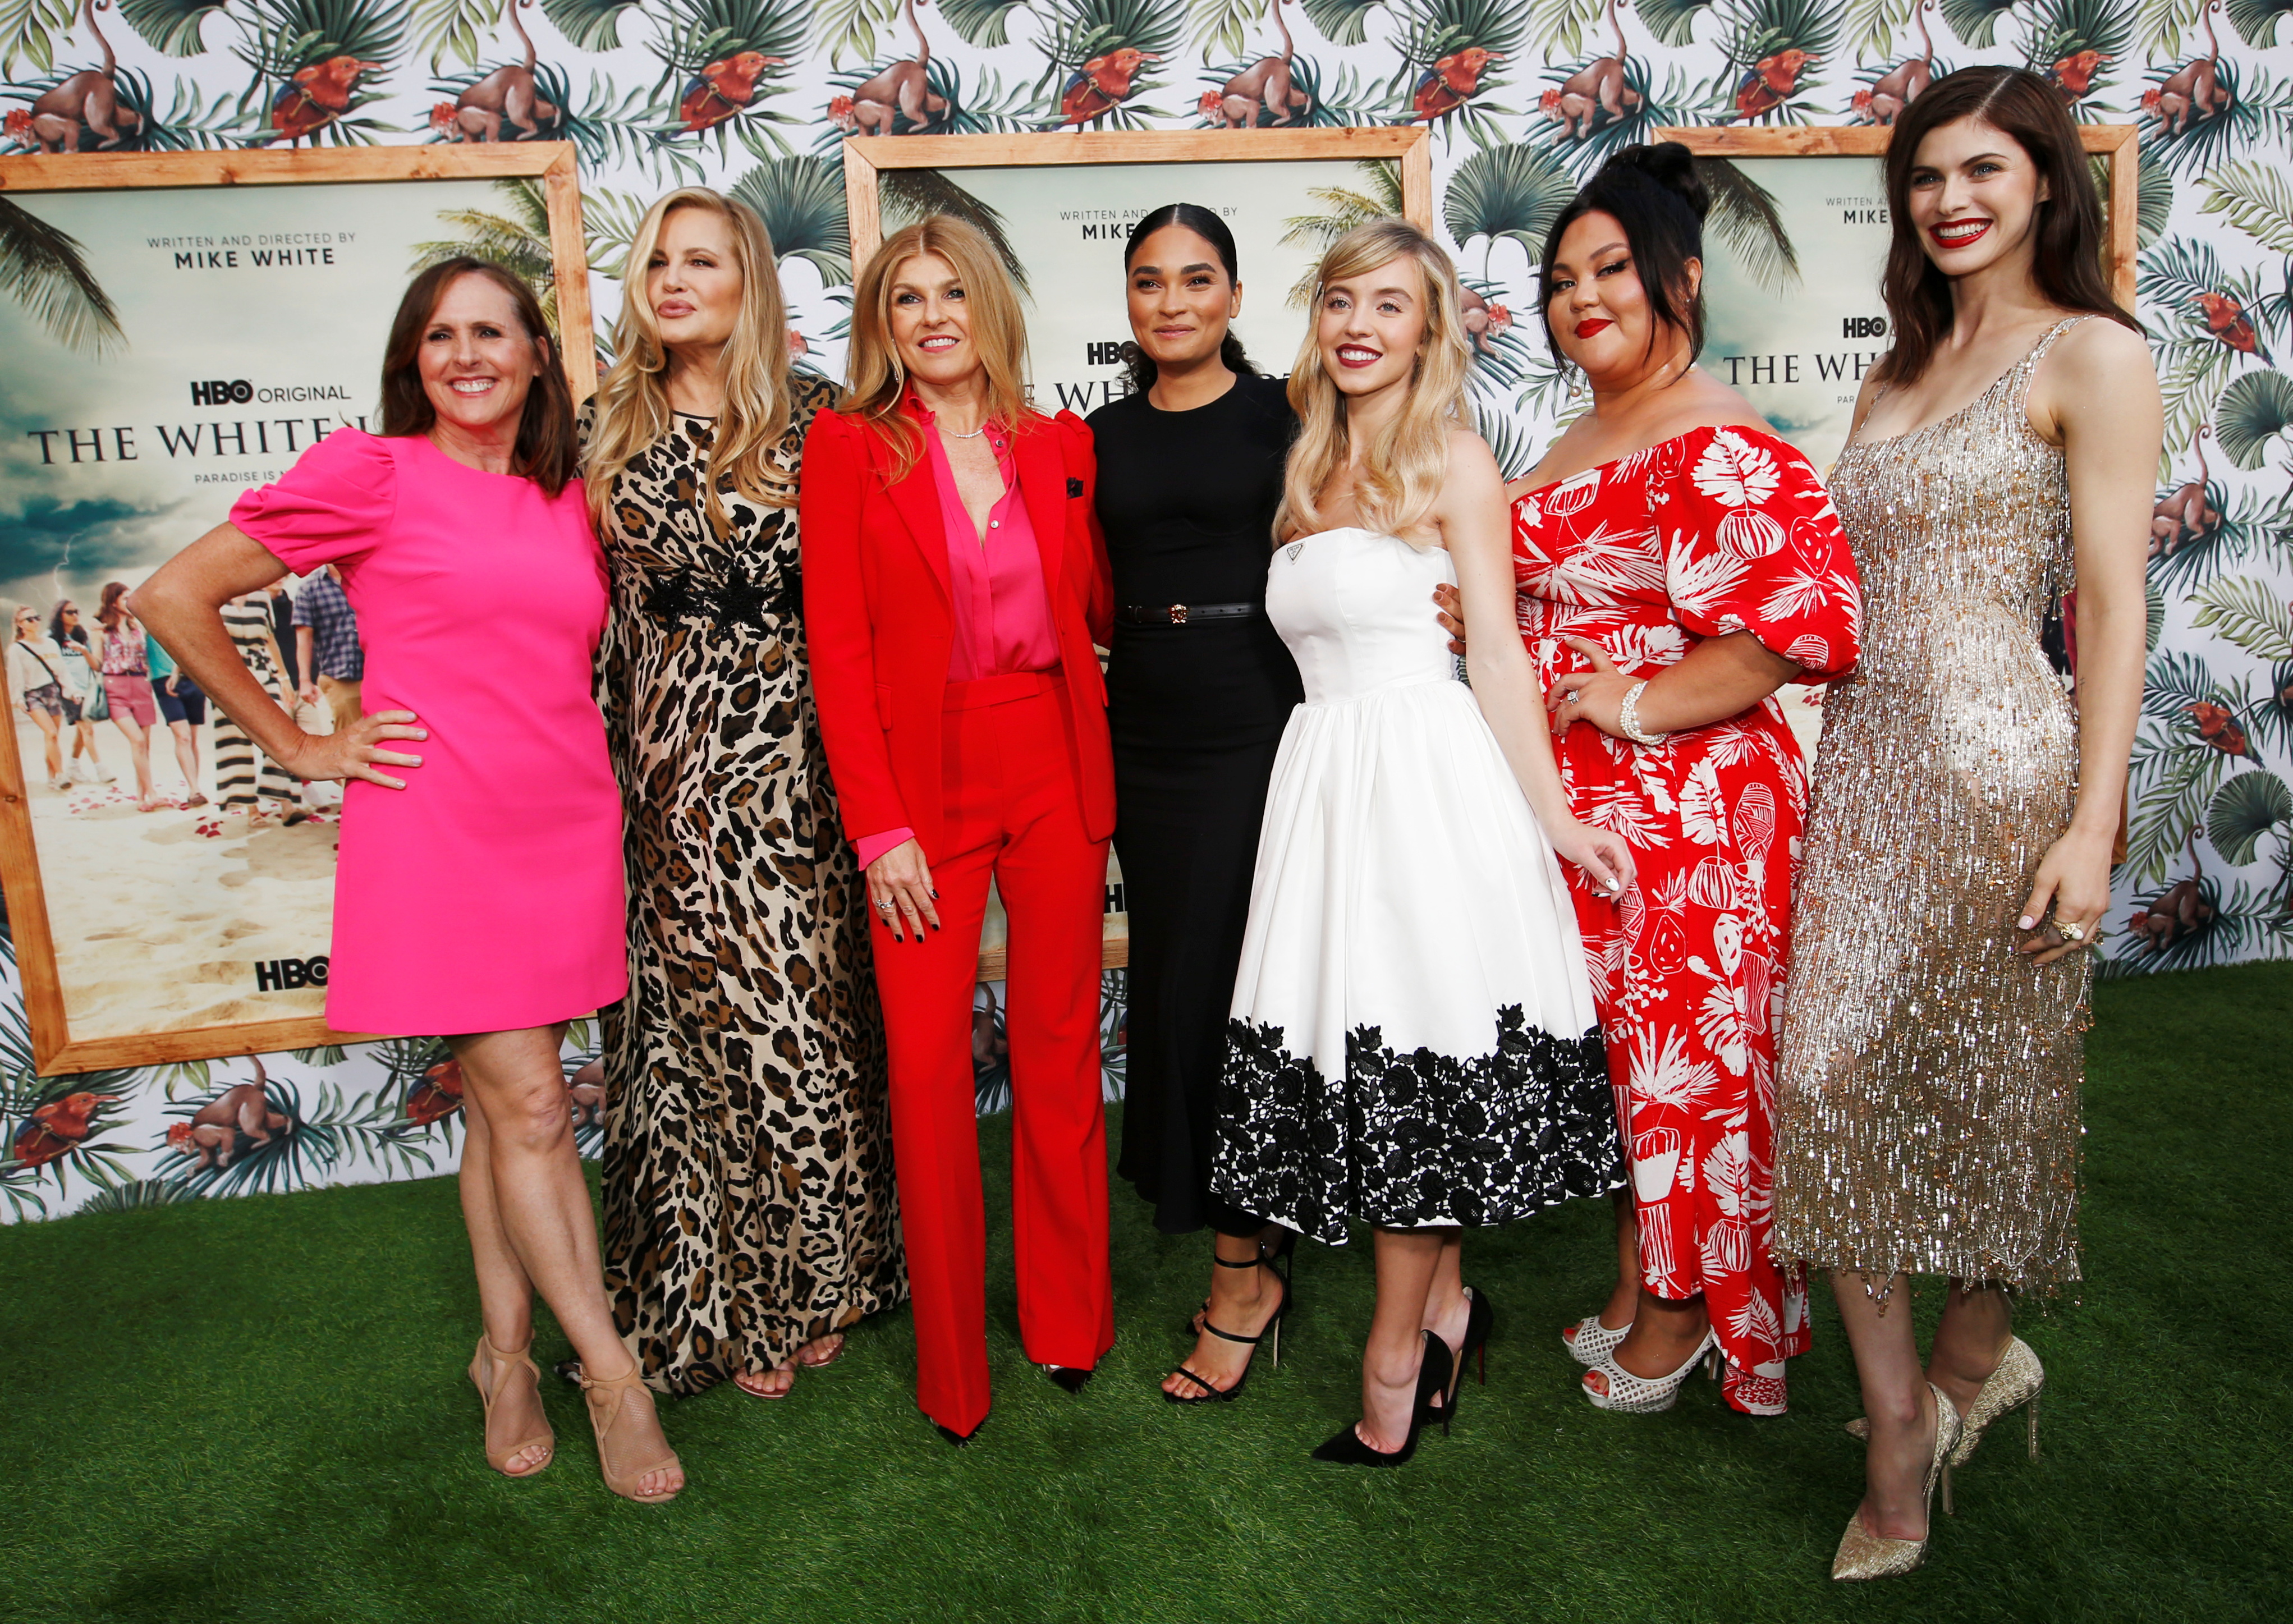 The cast members of the first season of "The White Lotus", Molly Shannon, Jennifer Coolidge, Connie Britton, Brittany O'Grady, Sydney Sweeney, Jolene Purdy and Alexandra Daddario.  (REUTERS)